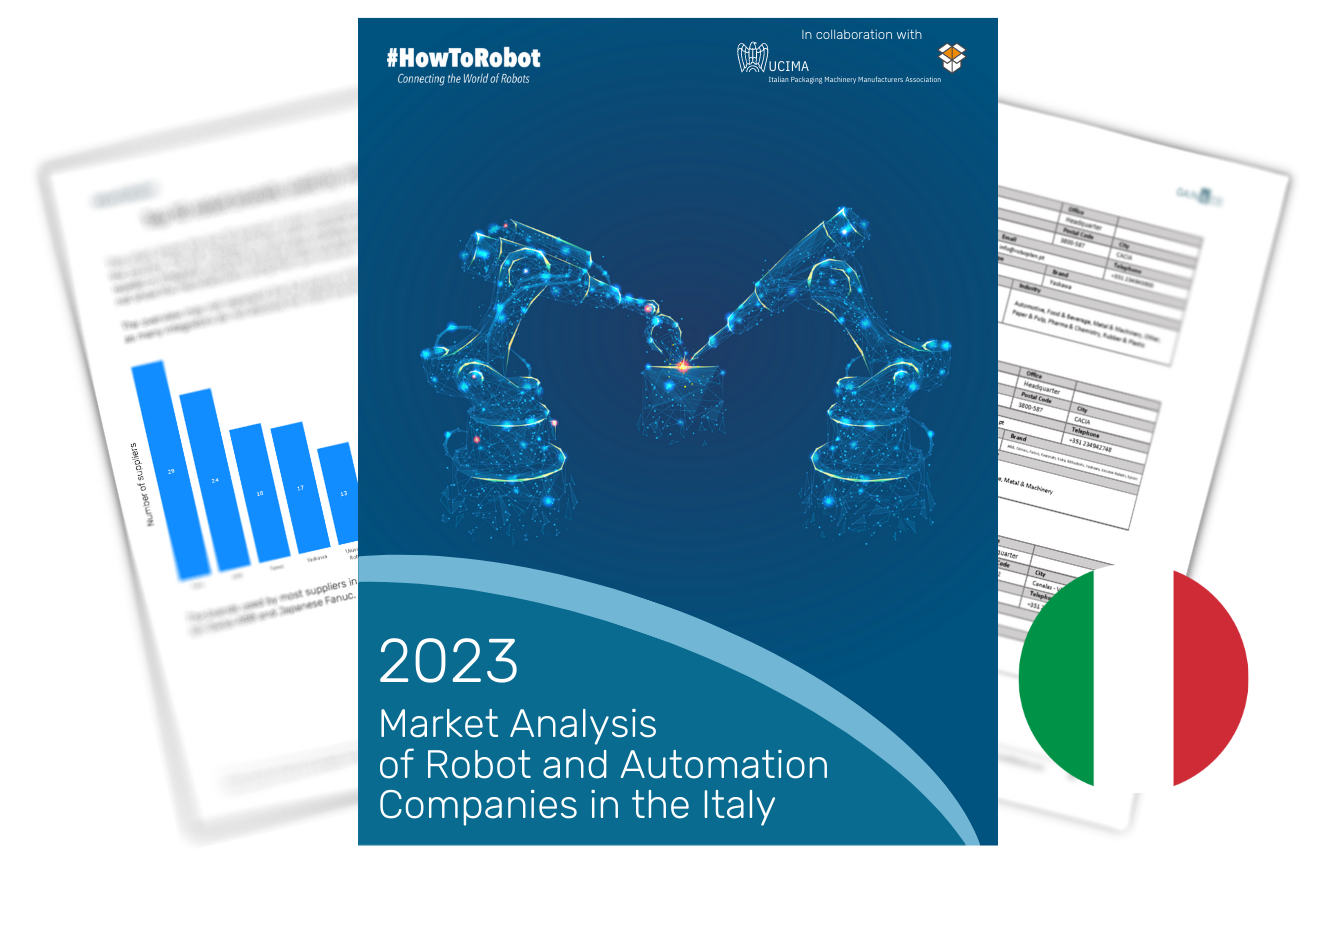 Market Report of Robot and Automation Companies in Italy